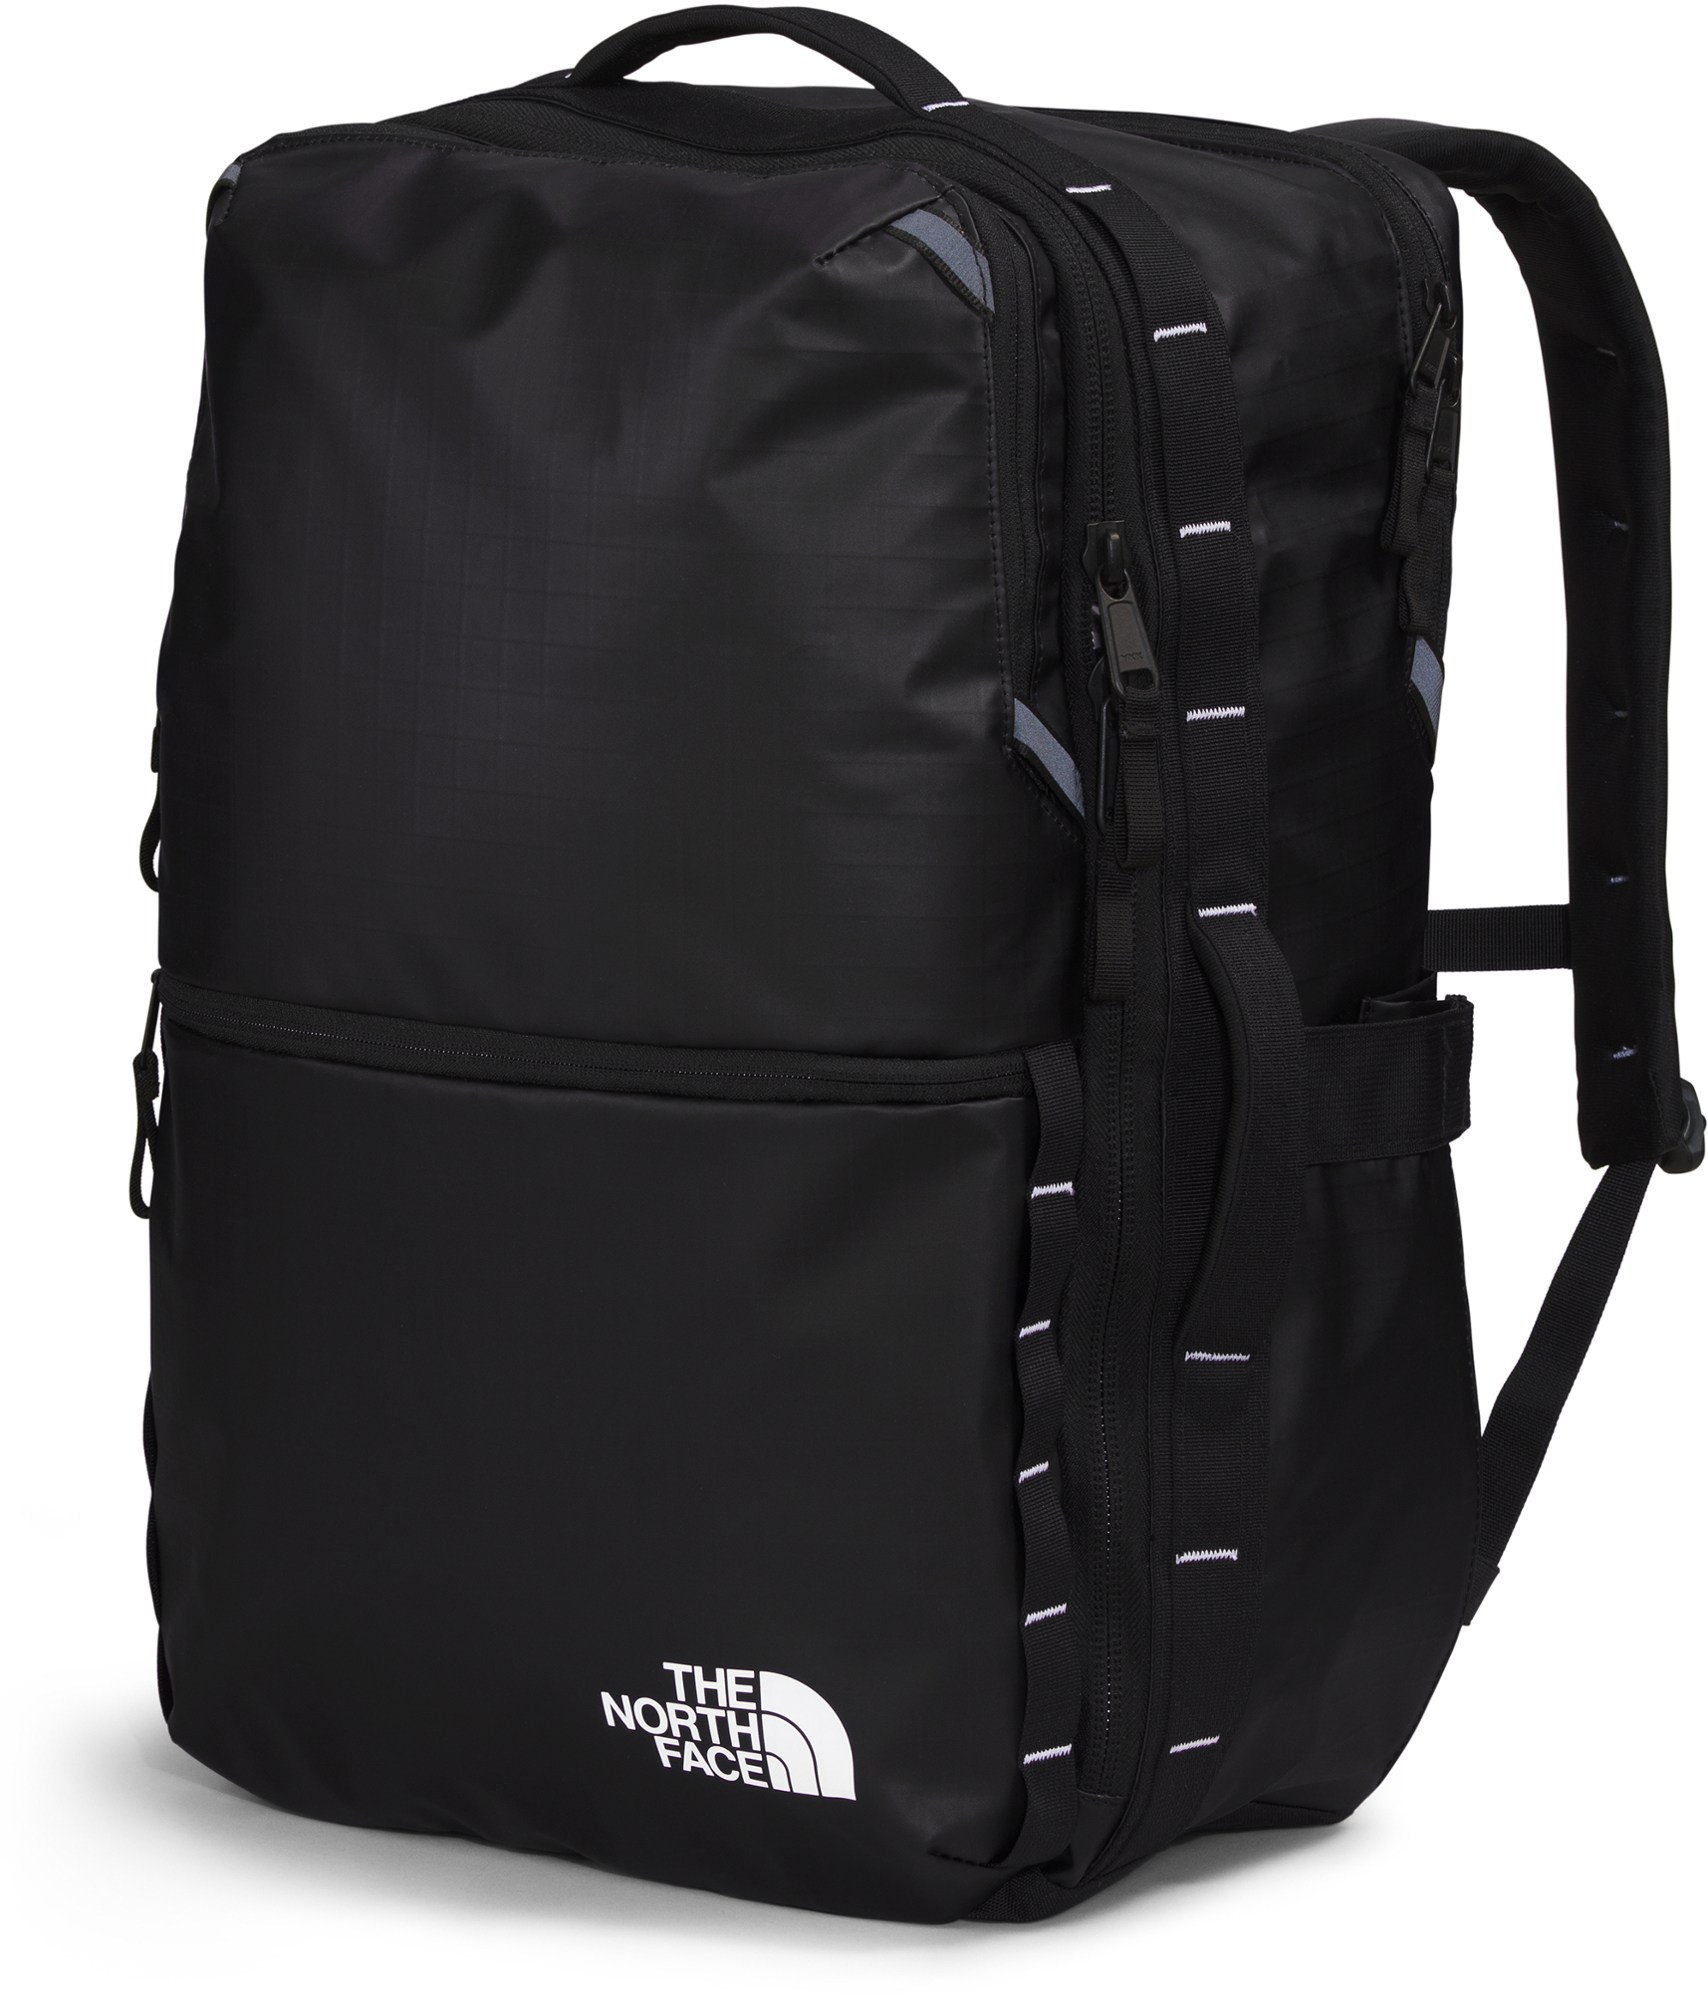 The North Face Base Camp travel backpack